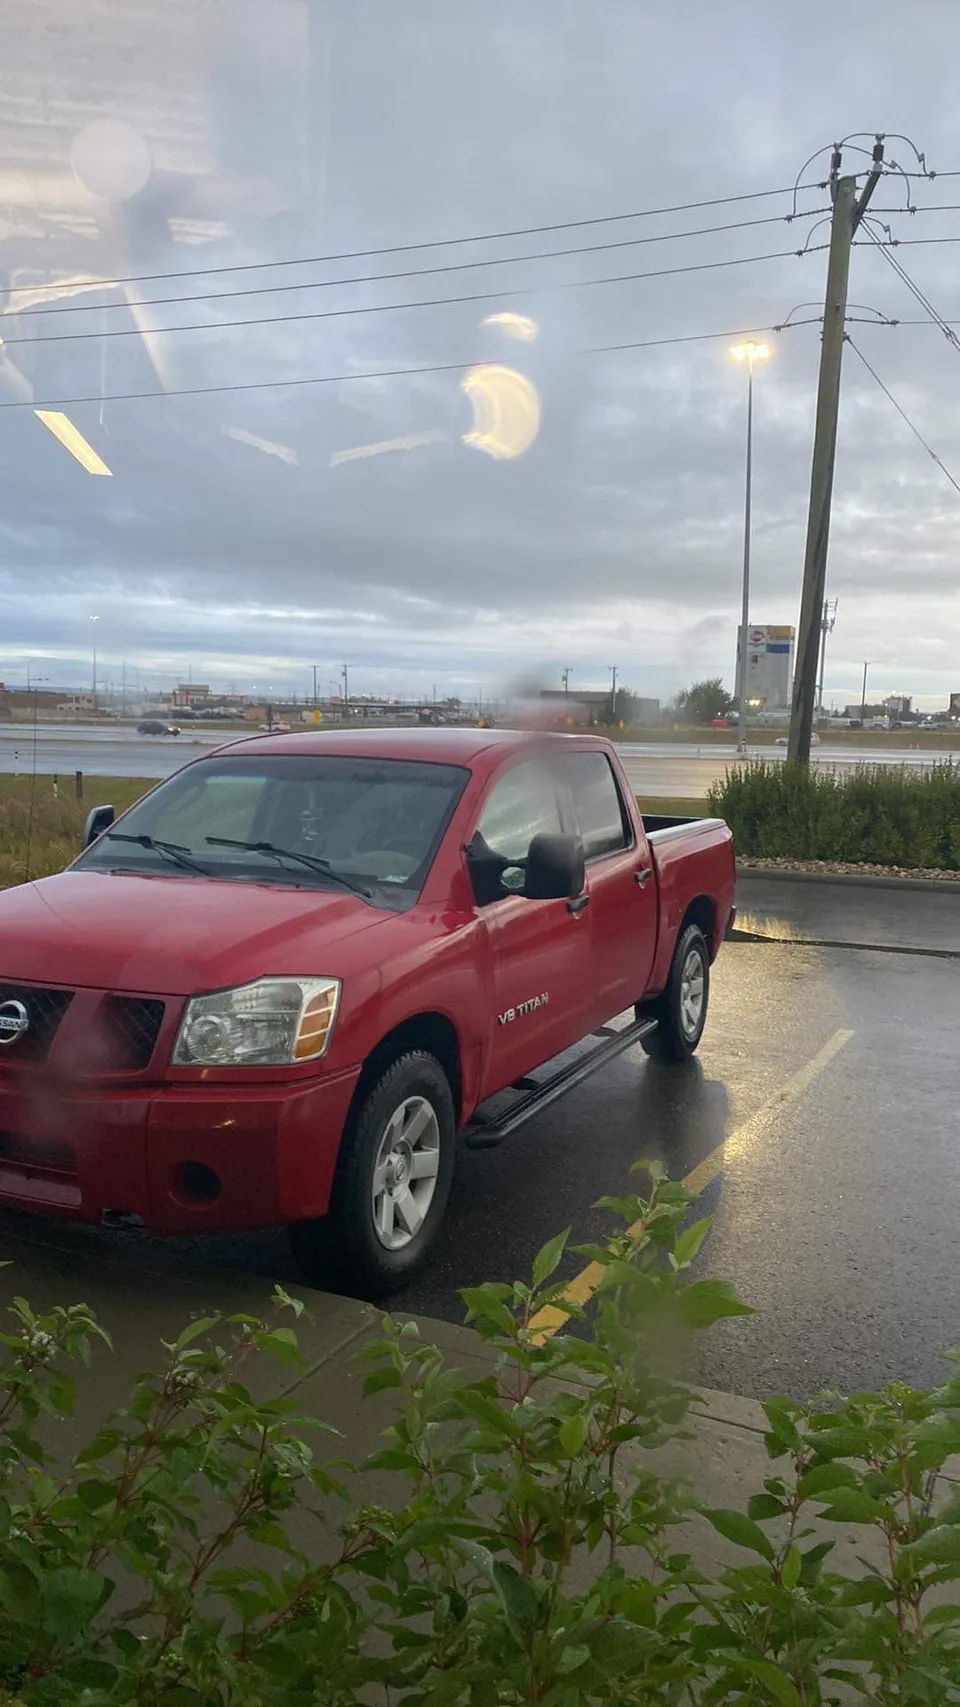 For Sale or Trade - 2007 Nissan Titan